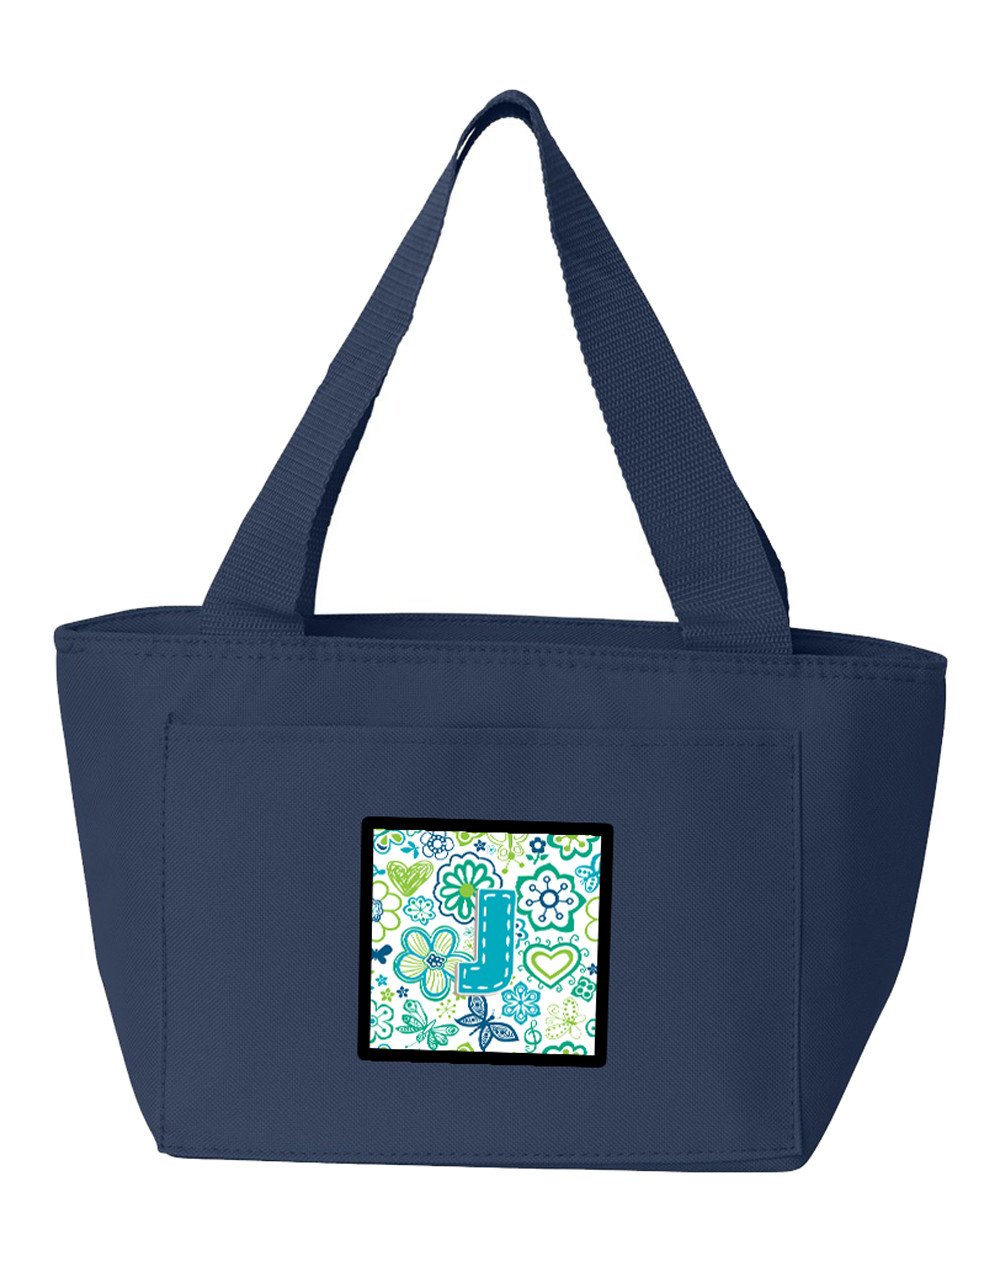 Letter J Flowers and Butterflies Teal Blue Lunch Bag CJ2006-JNA-8808 by Caroline's Treasures